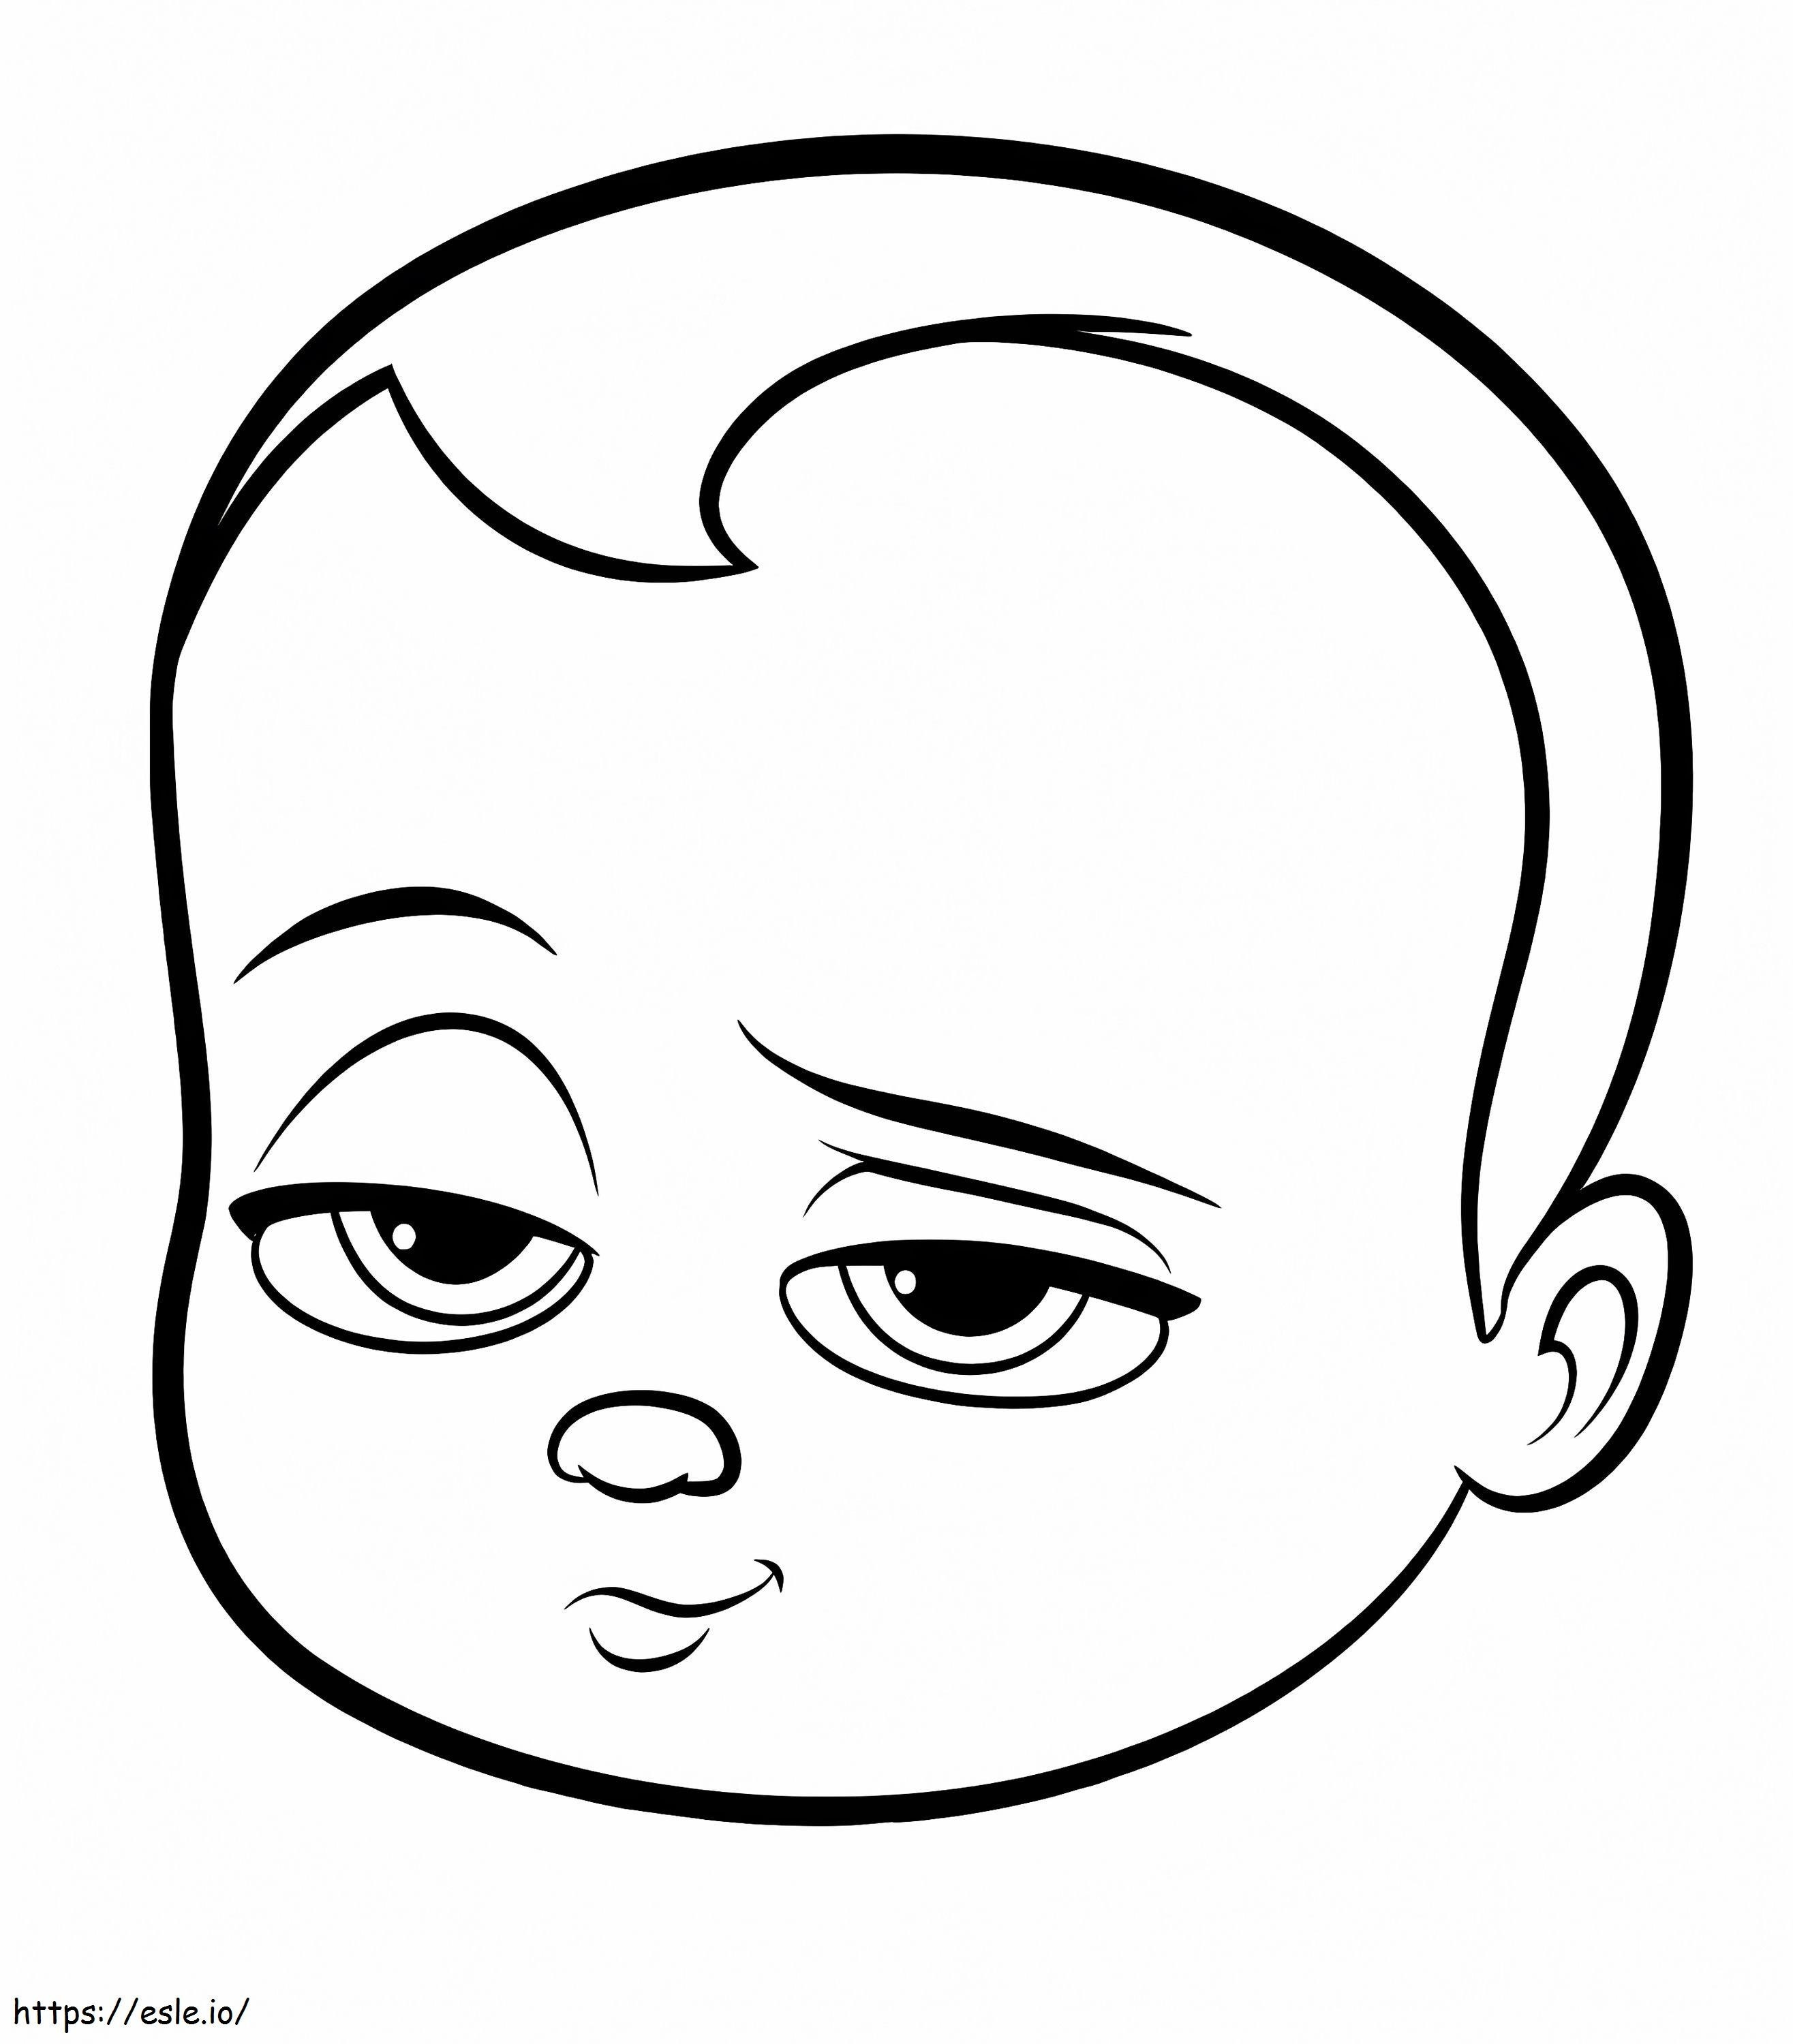 Baby Boss 4 Coloring Pages 1 coloring page